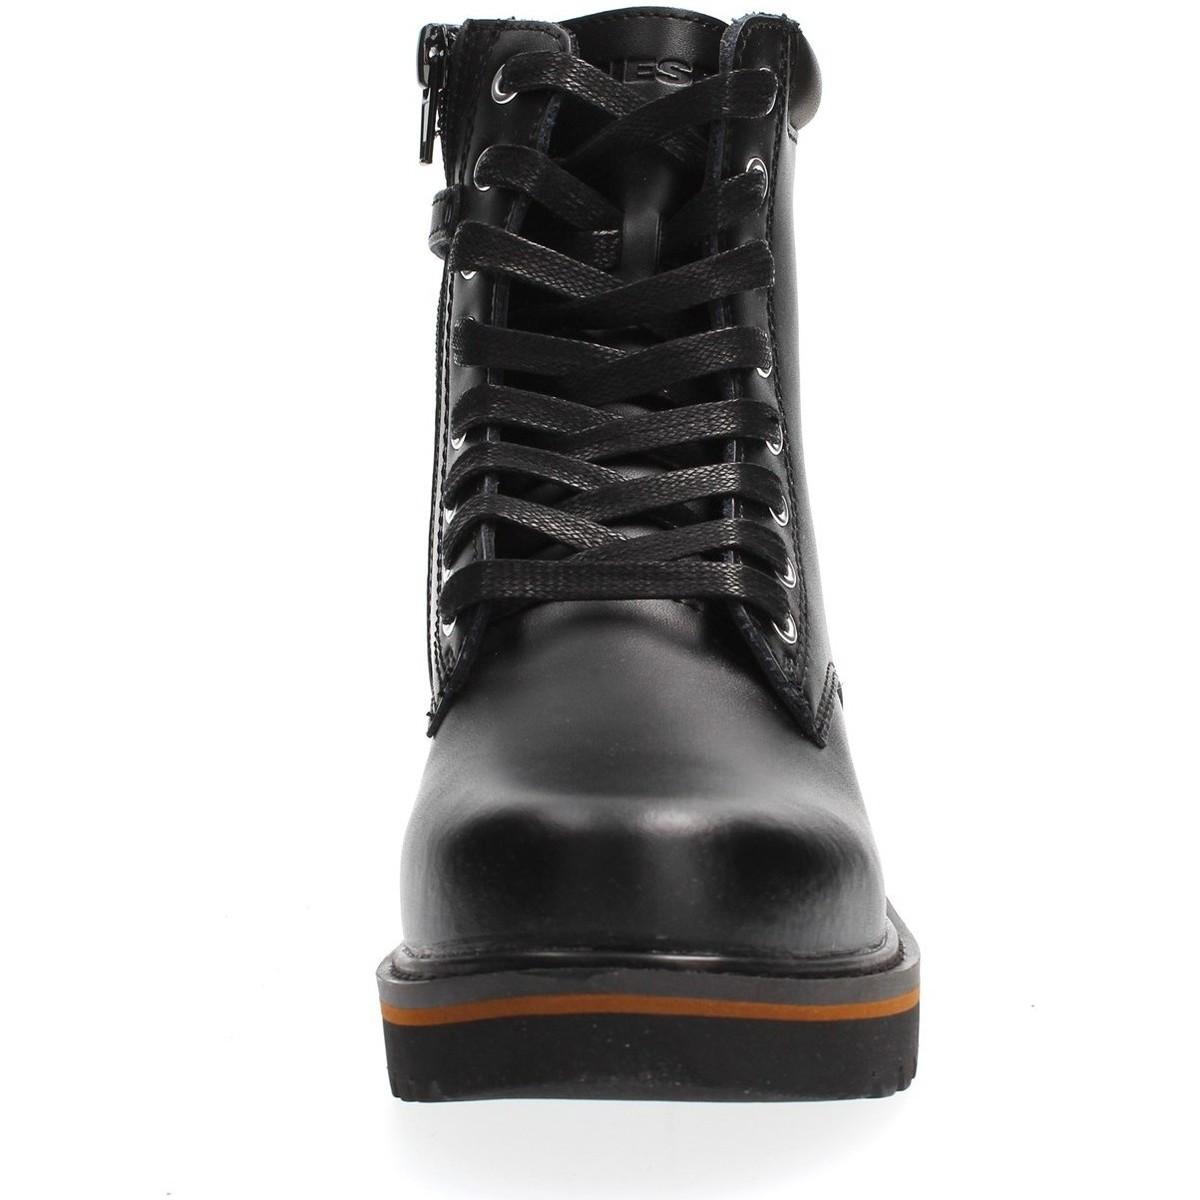 DIESEL Hb Lauce Boots Mid Boots in Black for Men - Lyst